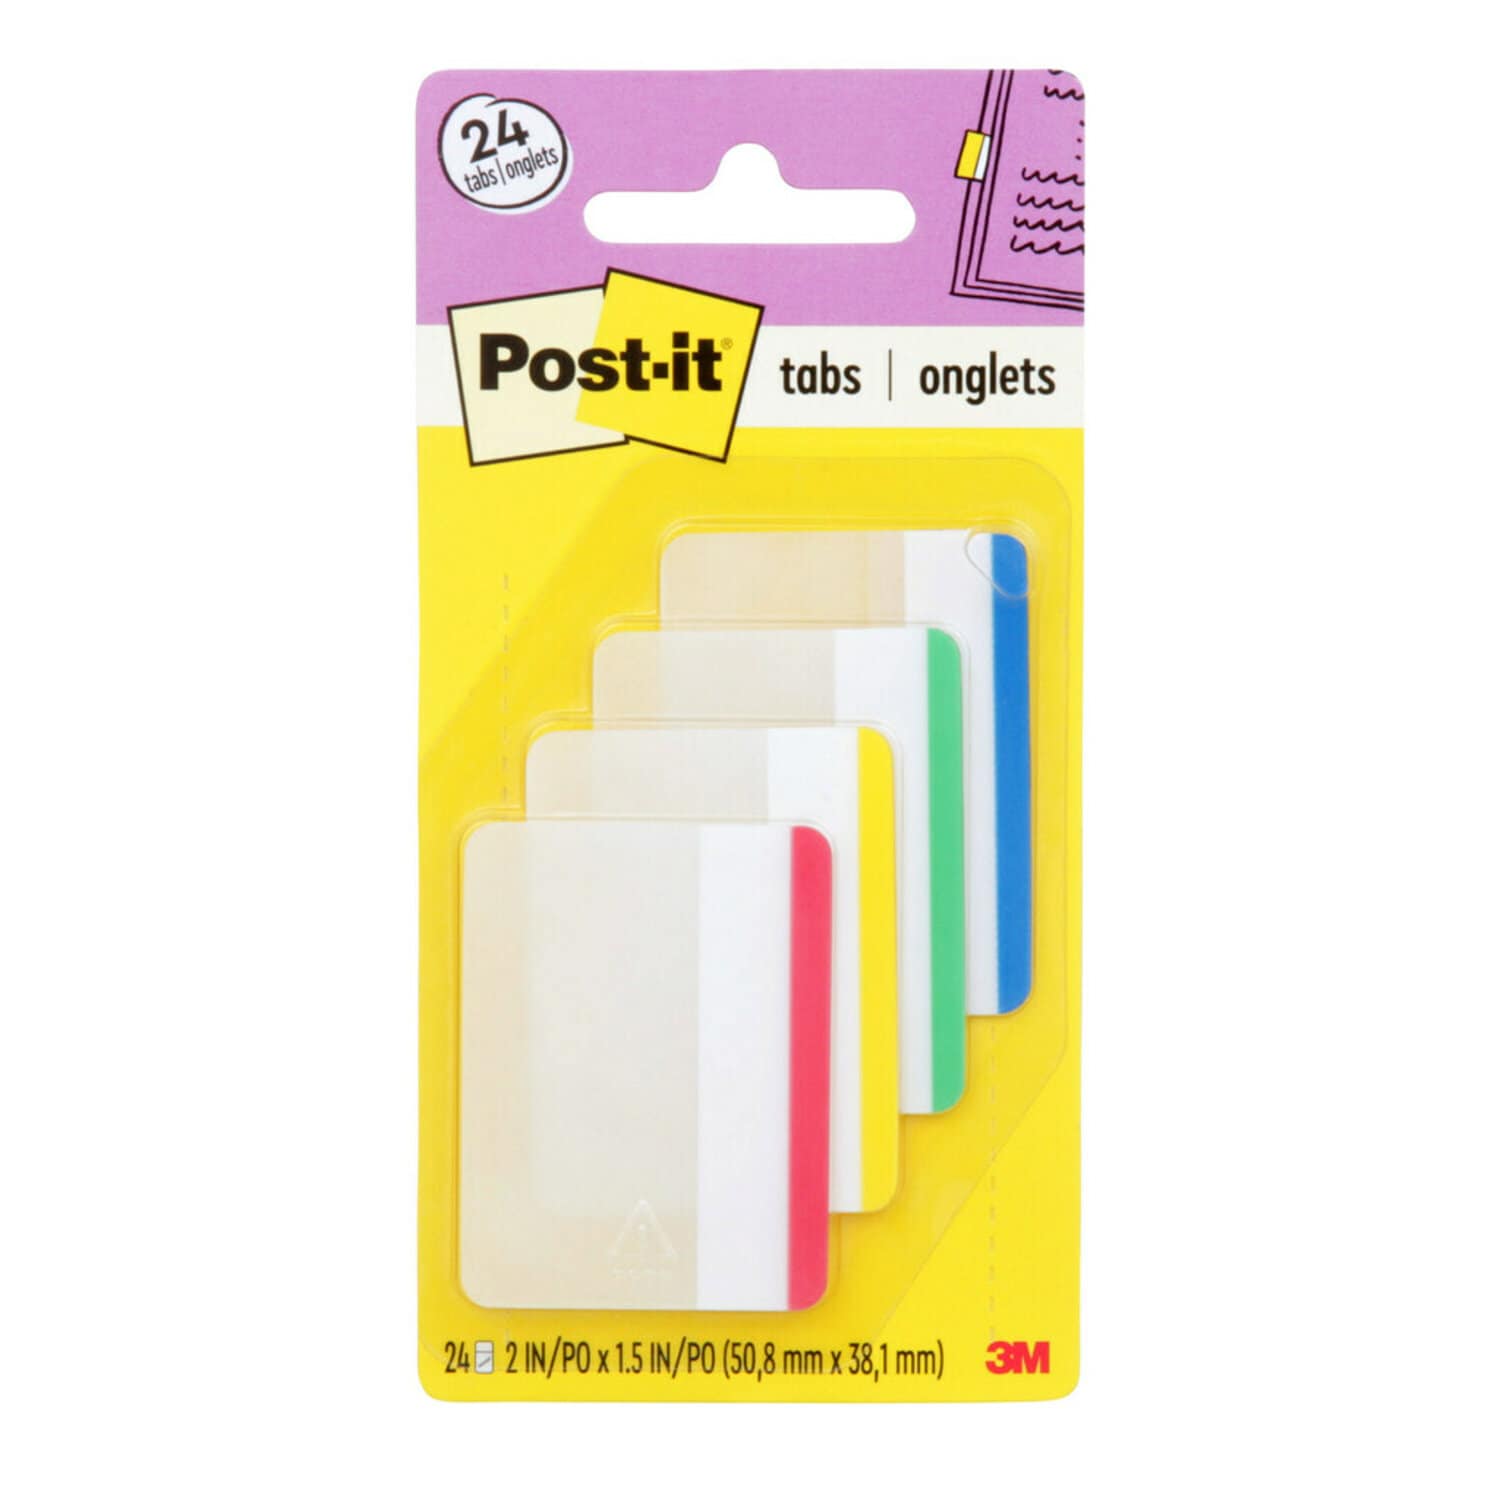 7000052638 - Post-it Durable Tabs 686F-1, 2 in. x 1.5 in. (50.8 mm x 38 mm) Beige,
Green, Red, Canary Yellow 24 pk/cs